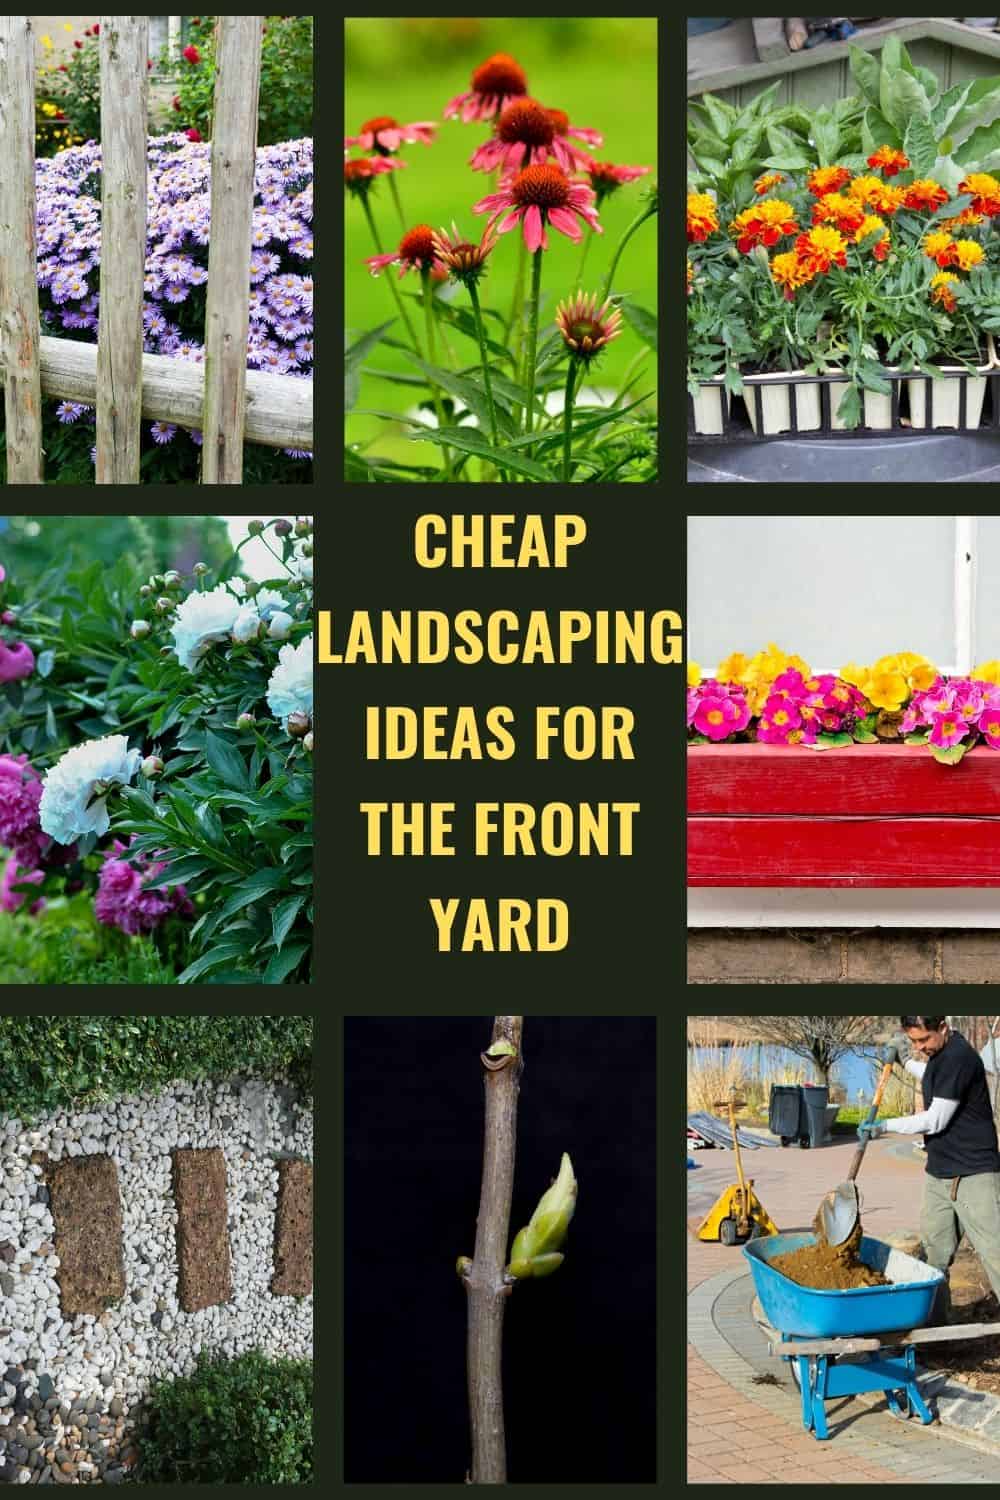 Landscaping Ideas For The Front, How To Landscape Front Yard On A Budget